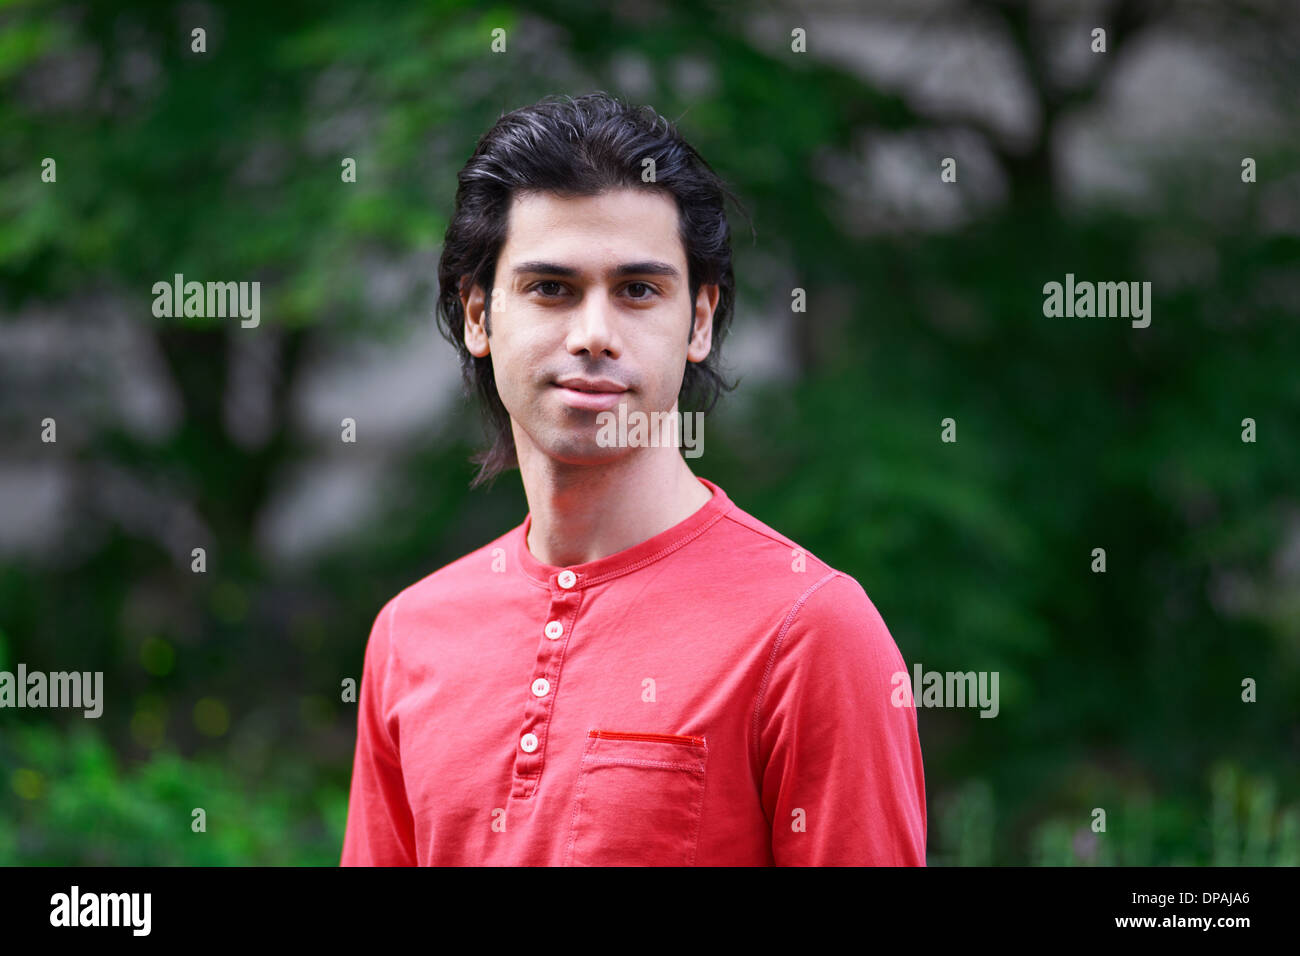 Portrait of young man wearing red top Banque D'Images